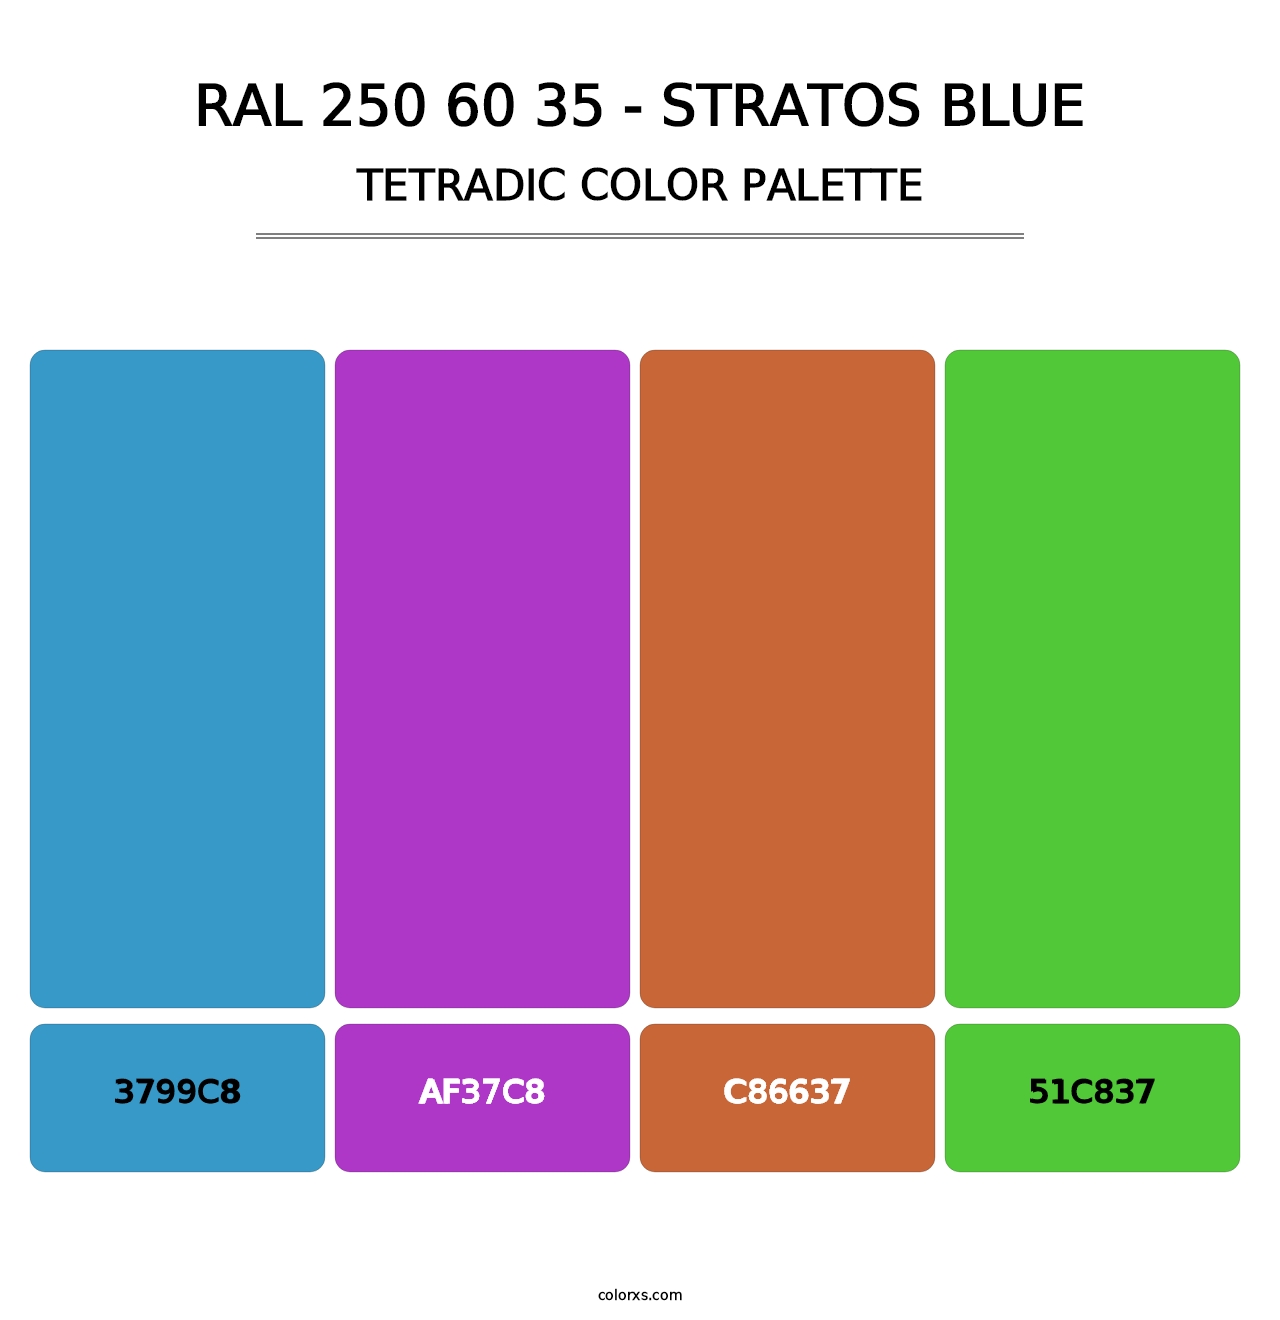 RAL 250 60 35 - Stratos Blue - Tetradic Color Palette